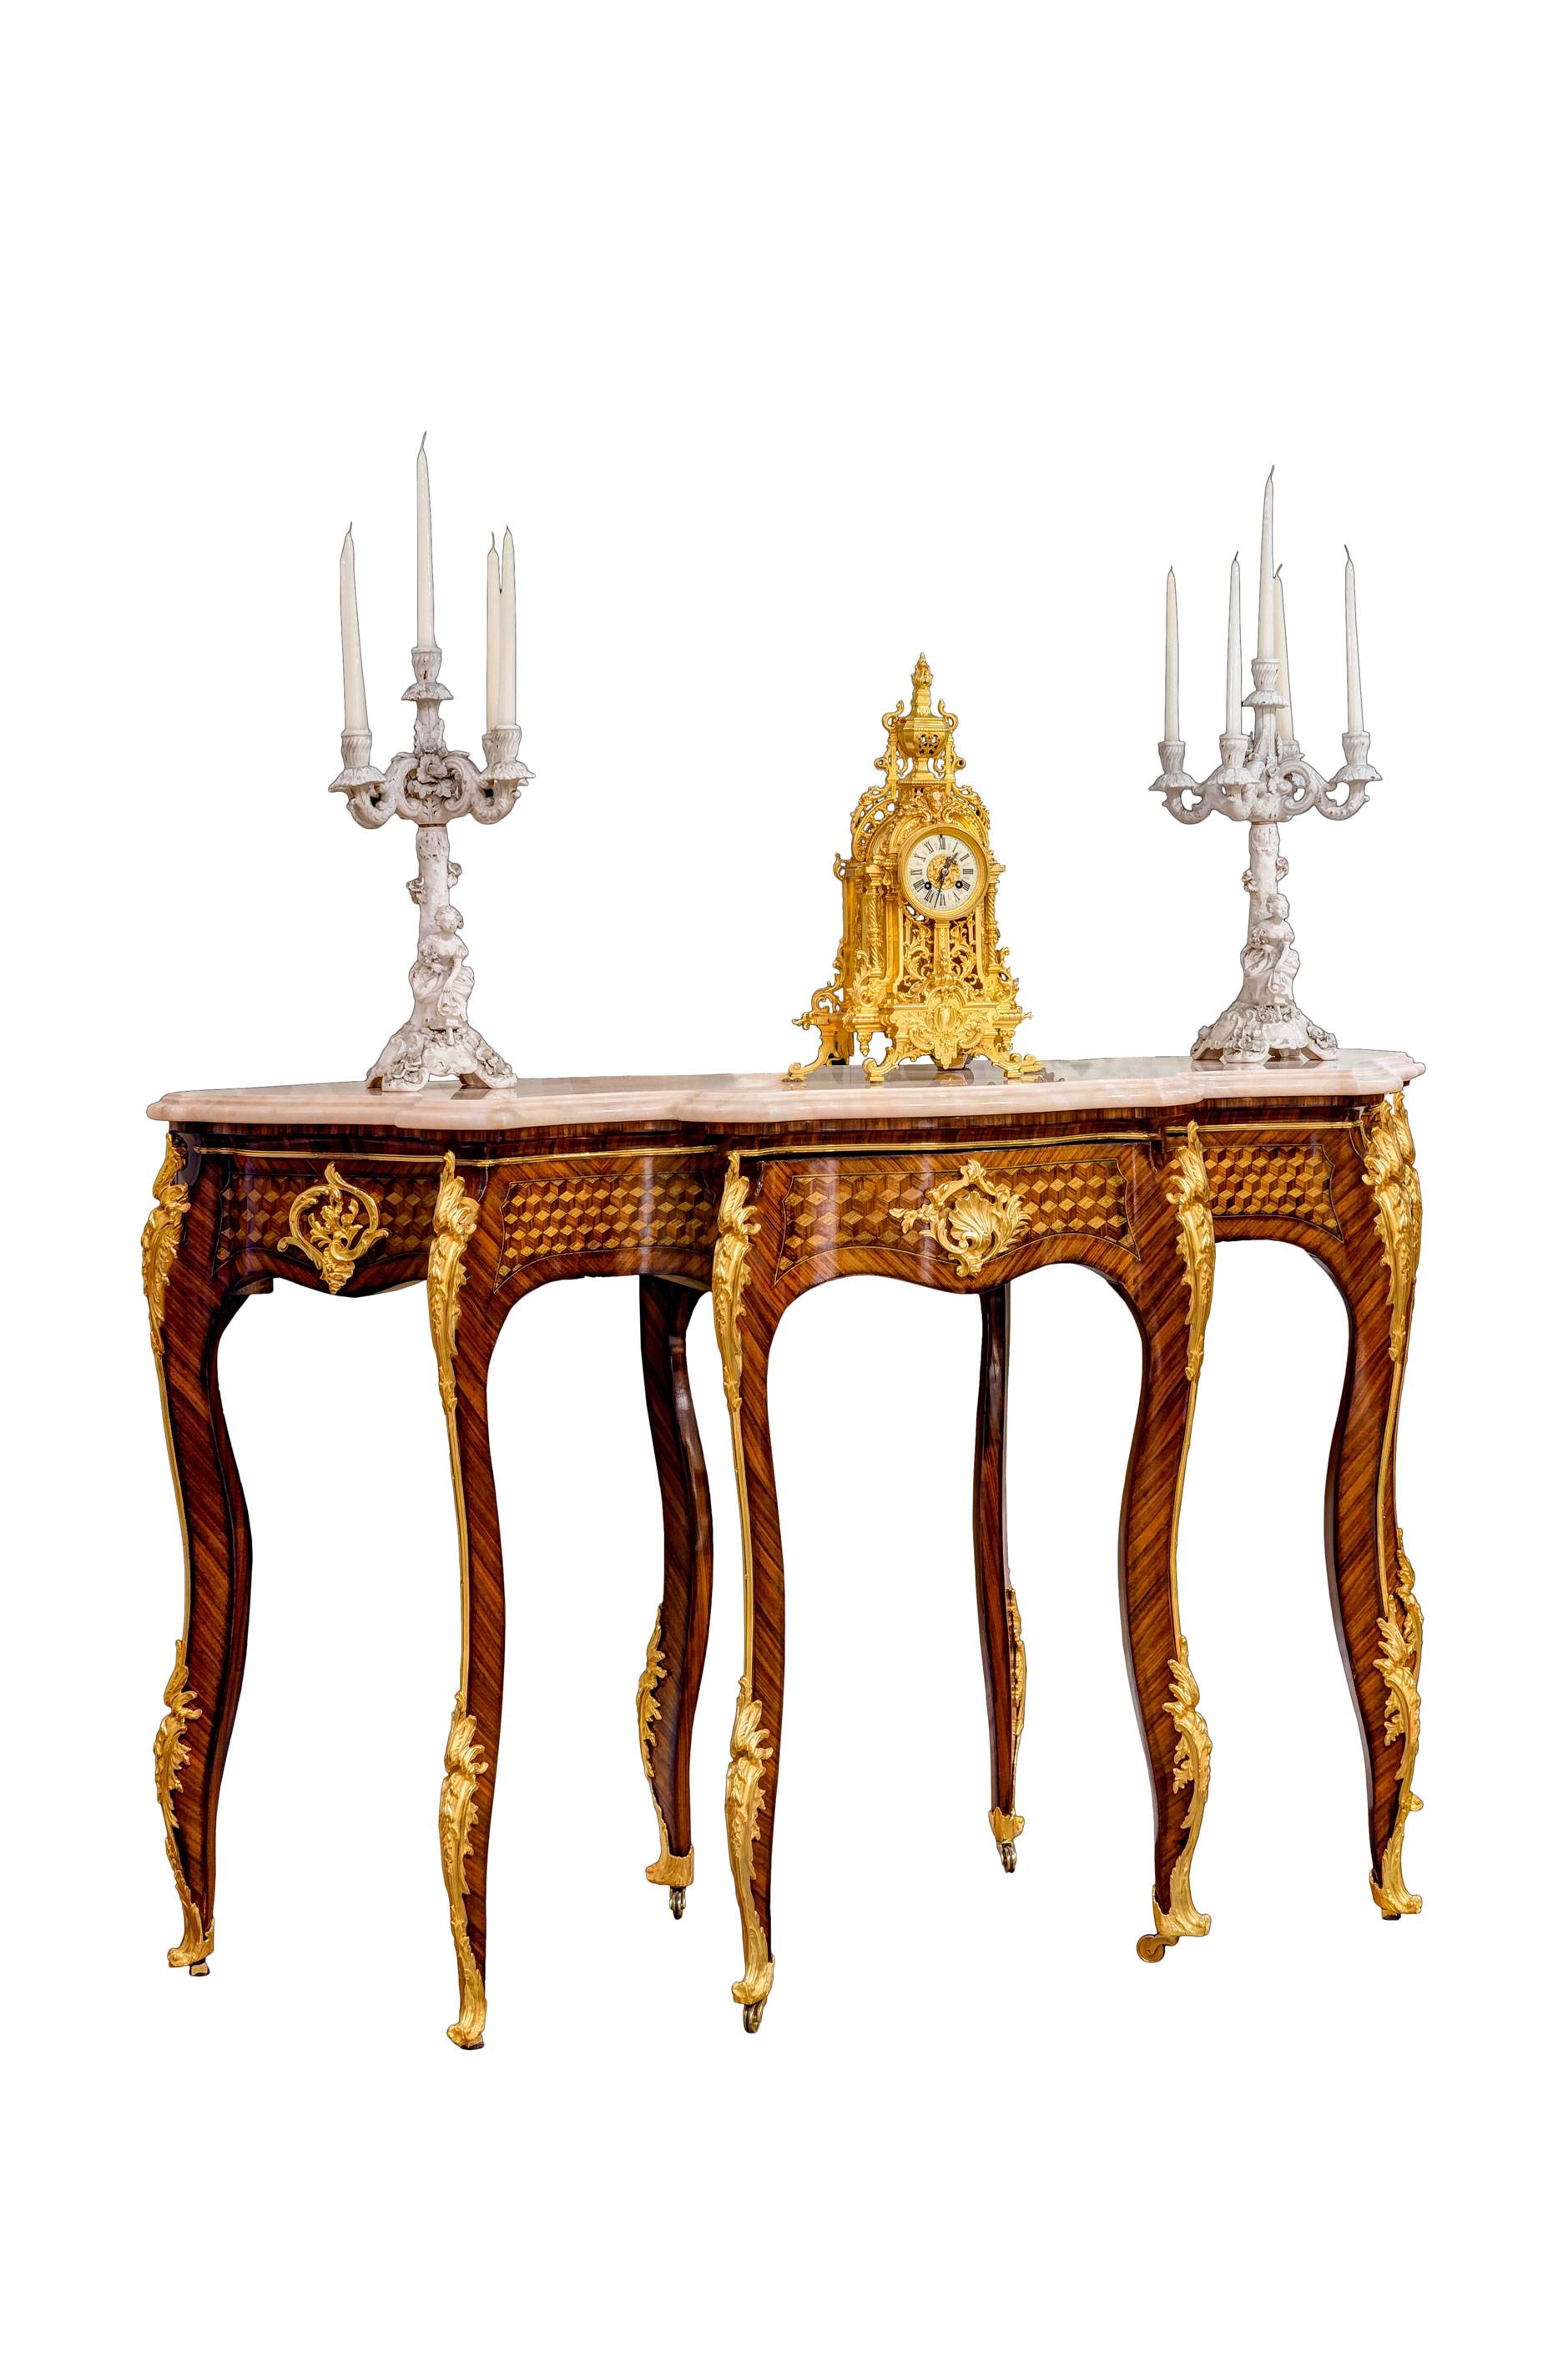 ART. 1094-3 - C.G. Capelletti quality furniture and timeless elegance with luxury made in italy contemporary Console.